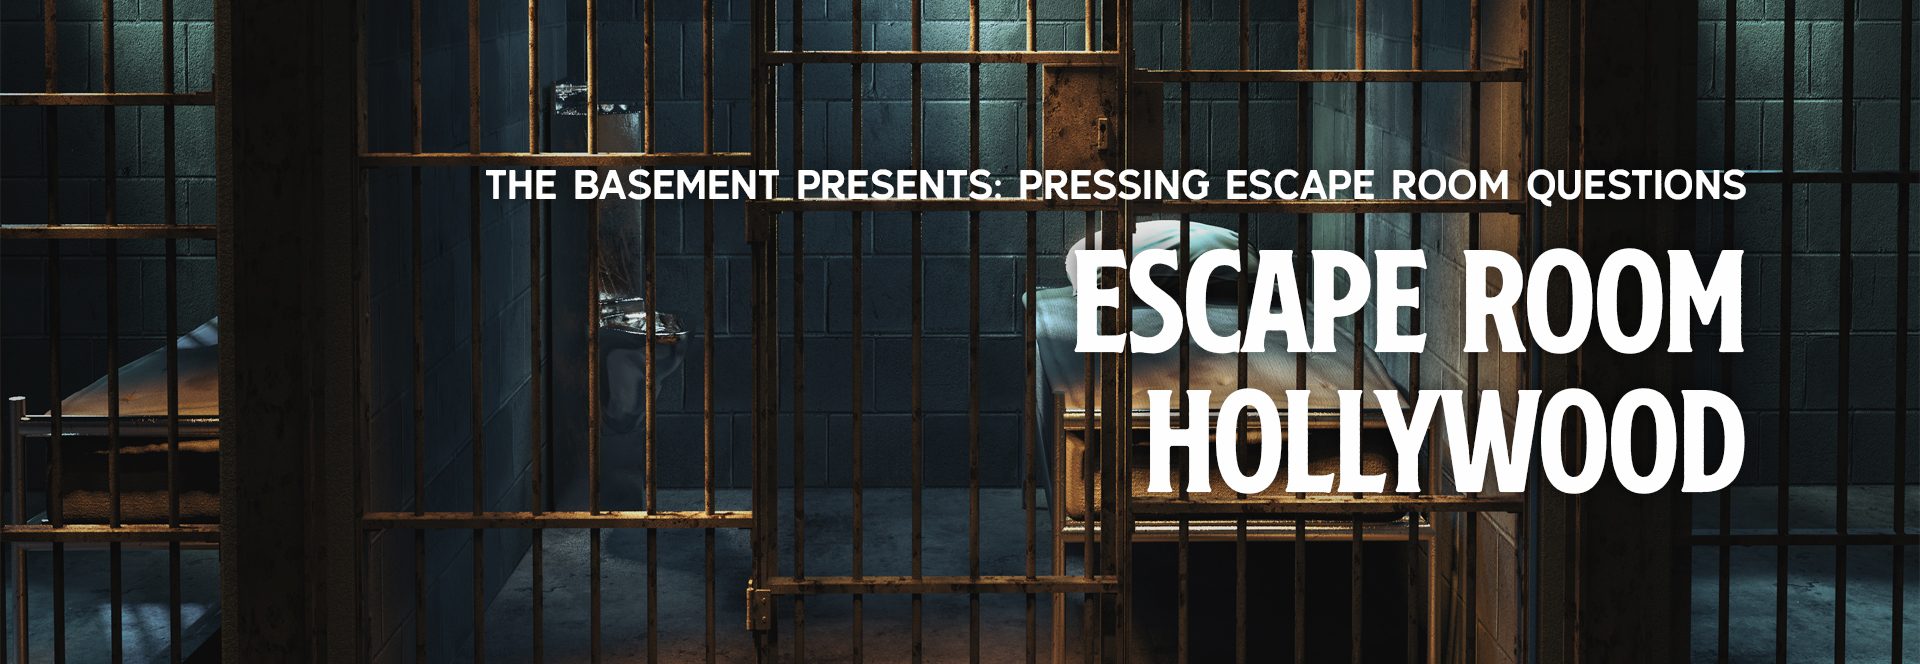 Escape Room Hollywood